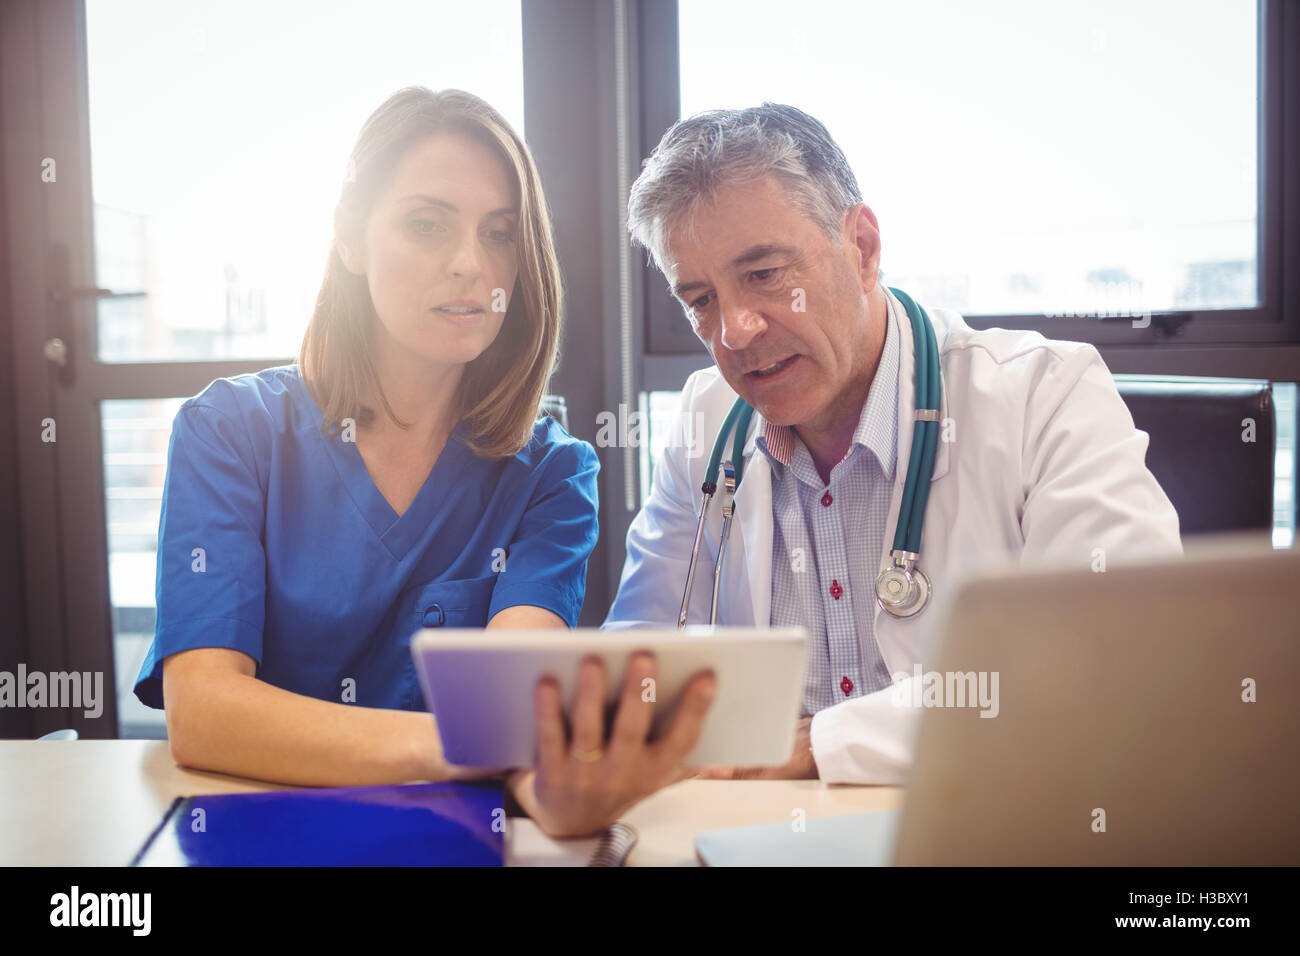 Doctor discussing with nurse over digital tablet Stock Photo